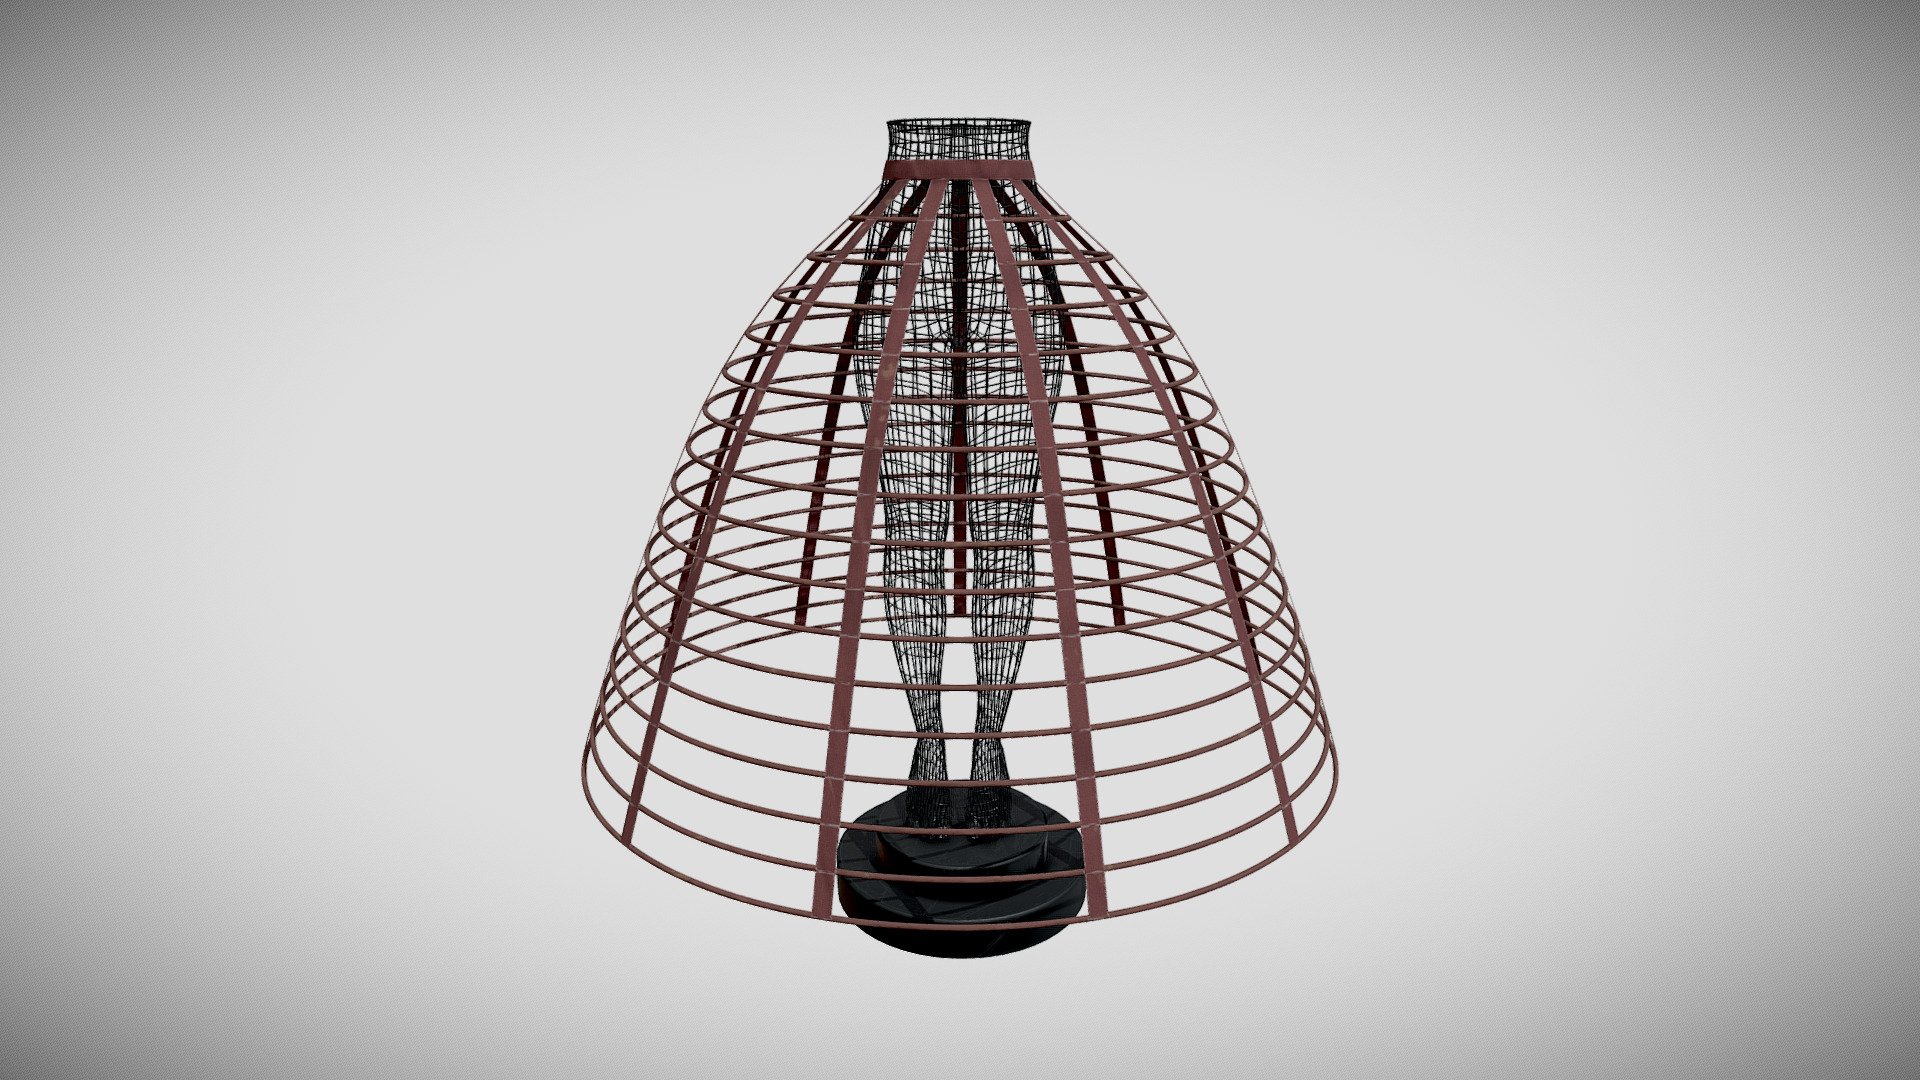 The 3D model presents a digital reconstruction of a historical crinoline - a special framework used to expand the fullness of the skirt in the mid 19th century. The crinoline is presented in a historical photograph. It has 16 hoops and 11 ribbons. A new method of parameterisation was applied to reproduce the shape and construction of the hoops, ribbons and belt (for further details see https://doi.org/10.1080/00405000.2019.1621042). The authors of the 3D model are

Aleksei Moskvin https://independent.academia.edu/AlekseiMoskvin

Mariia Moskvina https://independent.academia.edu/MariiaMoskvina

(Saint Petersburg State University of Industrial Technologies and Design)

DOI: http://dx.doi.org/10.13140/RG.2.2.15088.79369

The authors thank Prof. Victor Kuzmichev from Ivanovo State Polytechnic University for his important contribution to this reconstruction 3d model